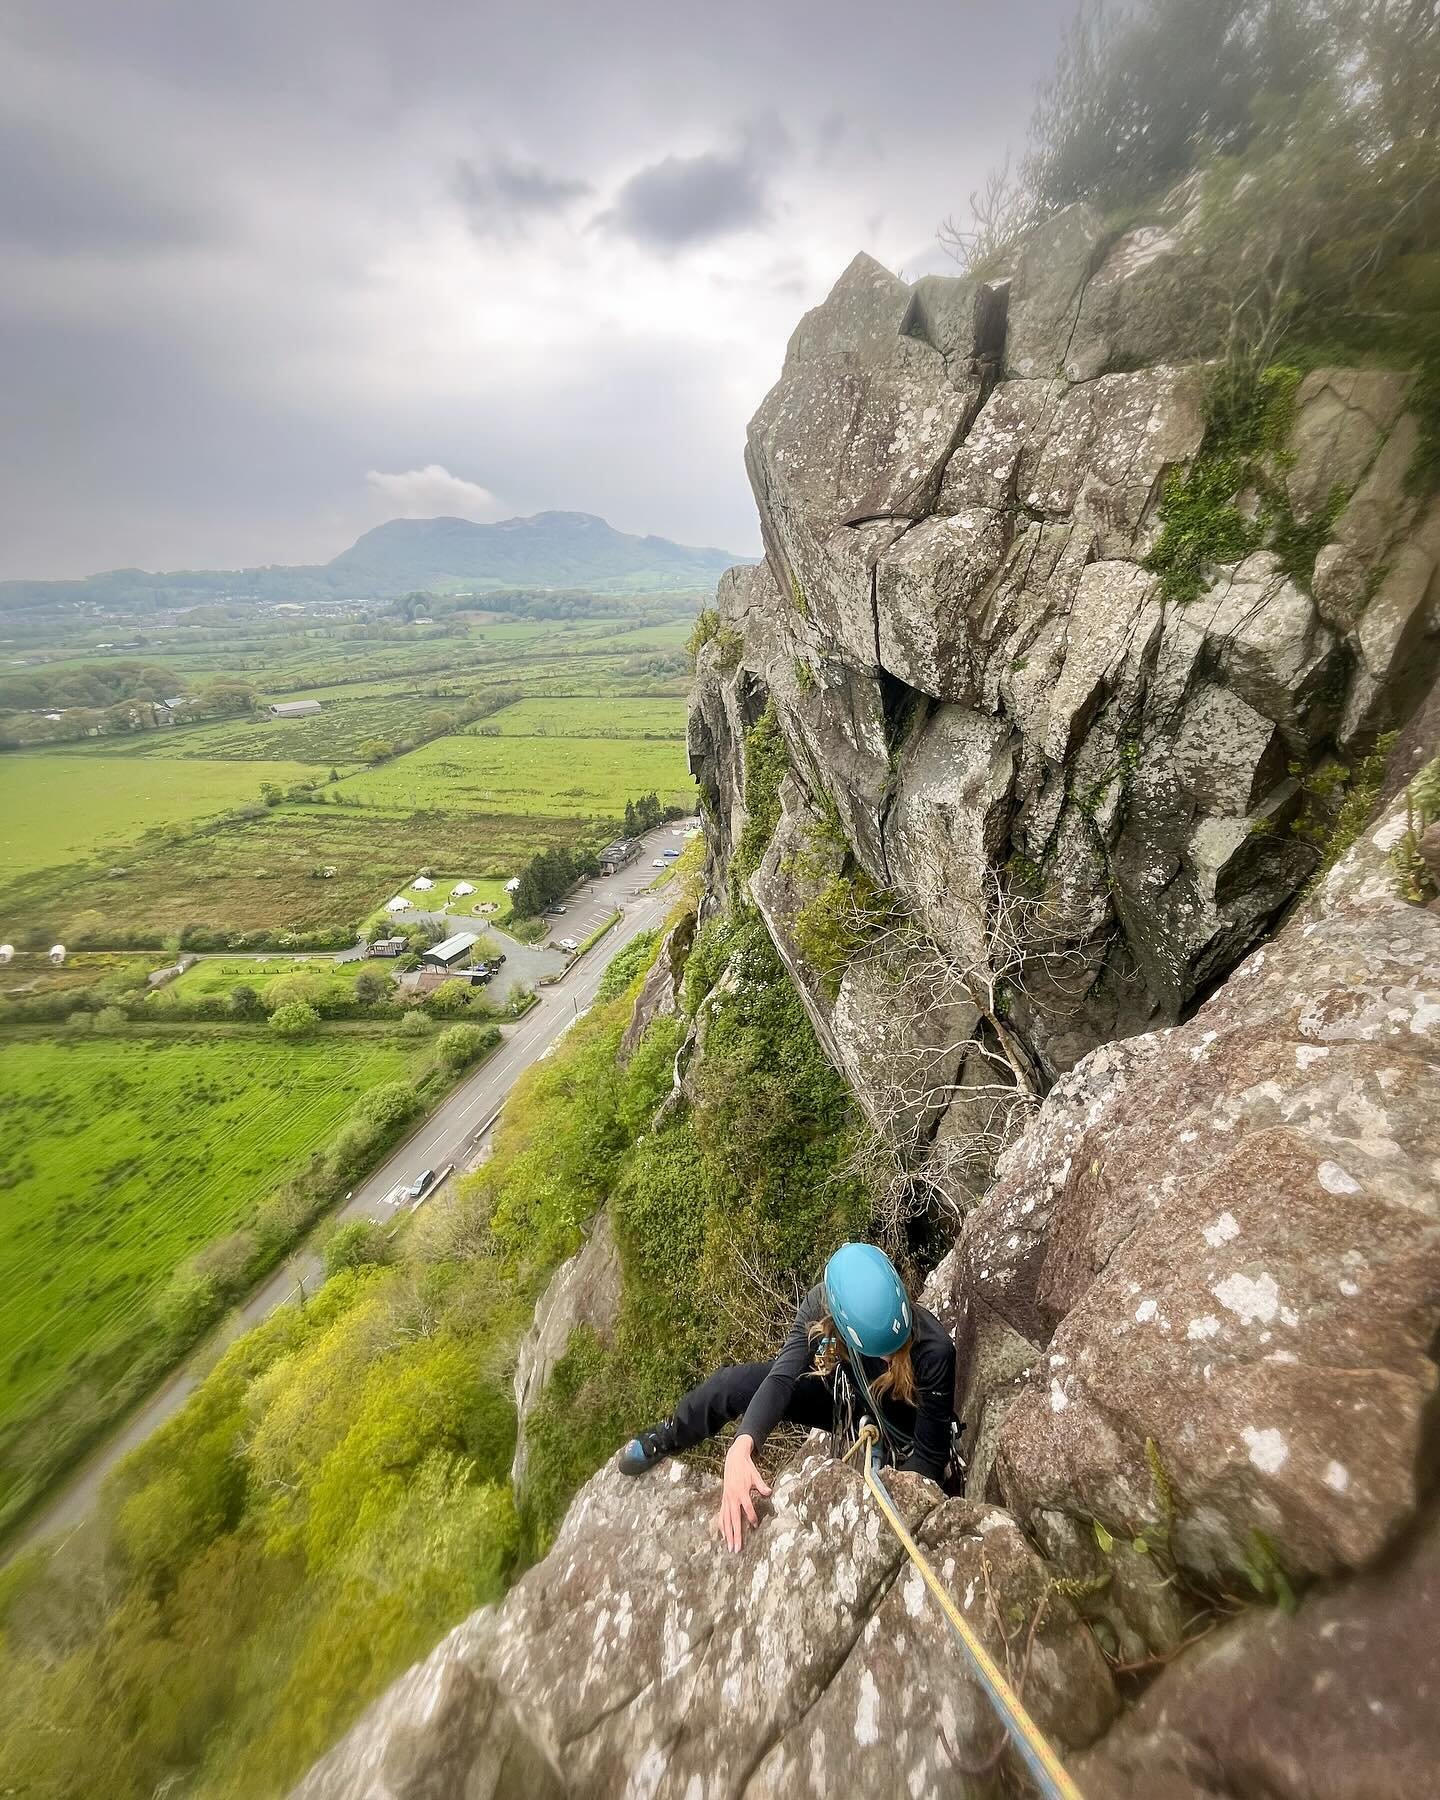 Lots of time on rock this week!

T shirt weather at Tremadog on Thursday with @trek_with_cair. We racked up 8 pitches of climbing, a few abseils and loads of learning. 

Finding some limestone gems on the Orme yesterday with @pinnacle_mountaineering.